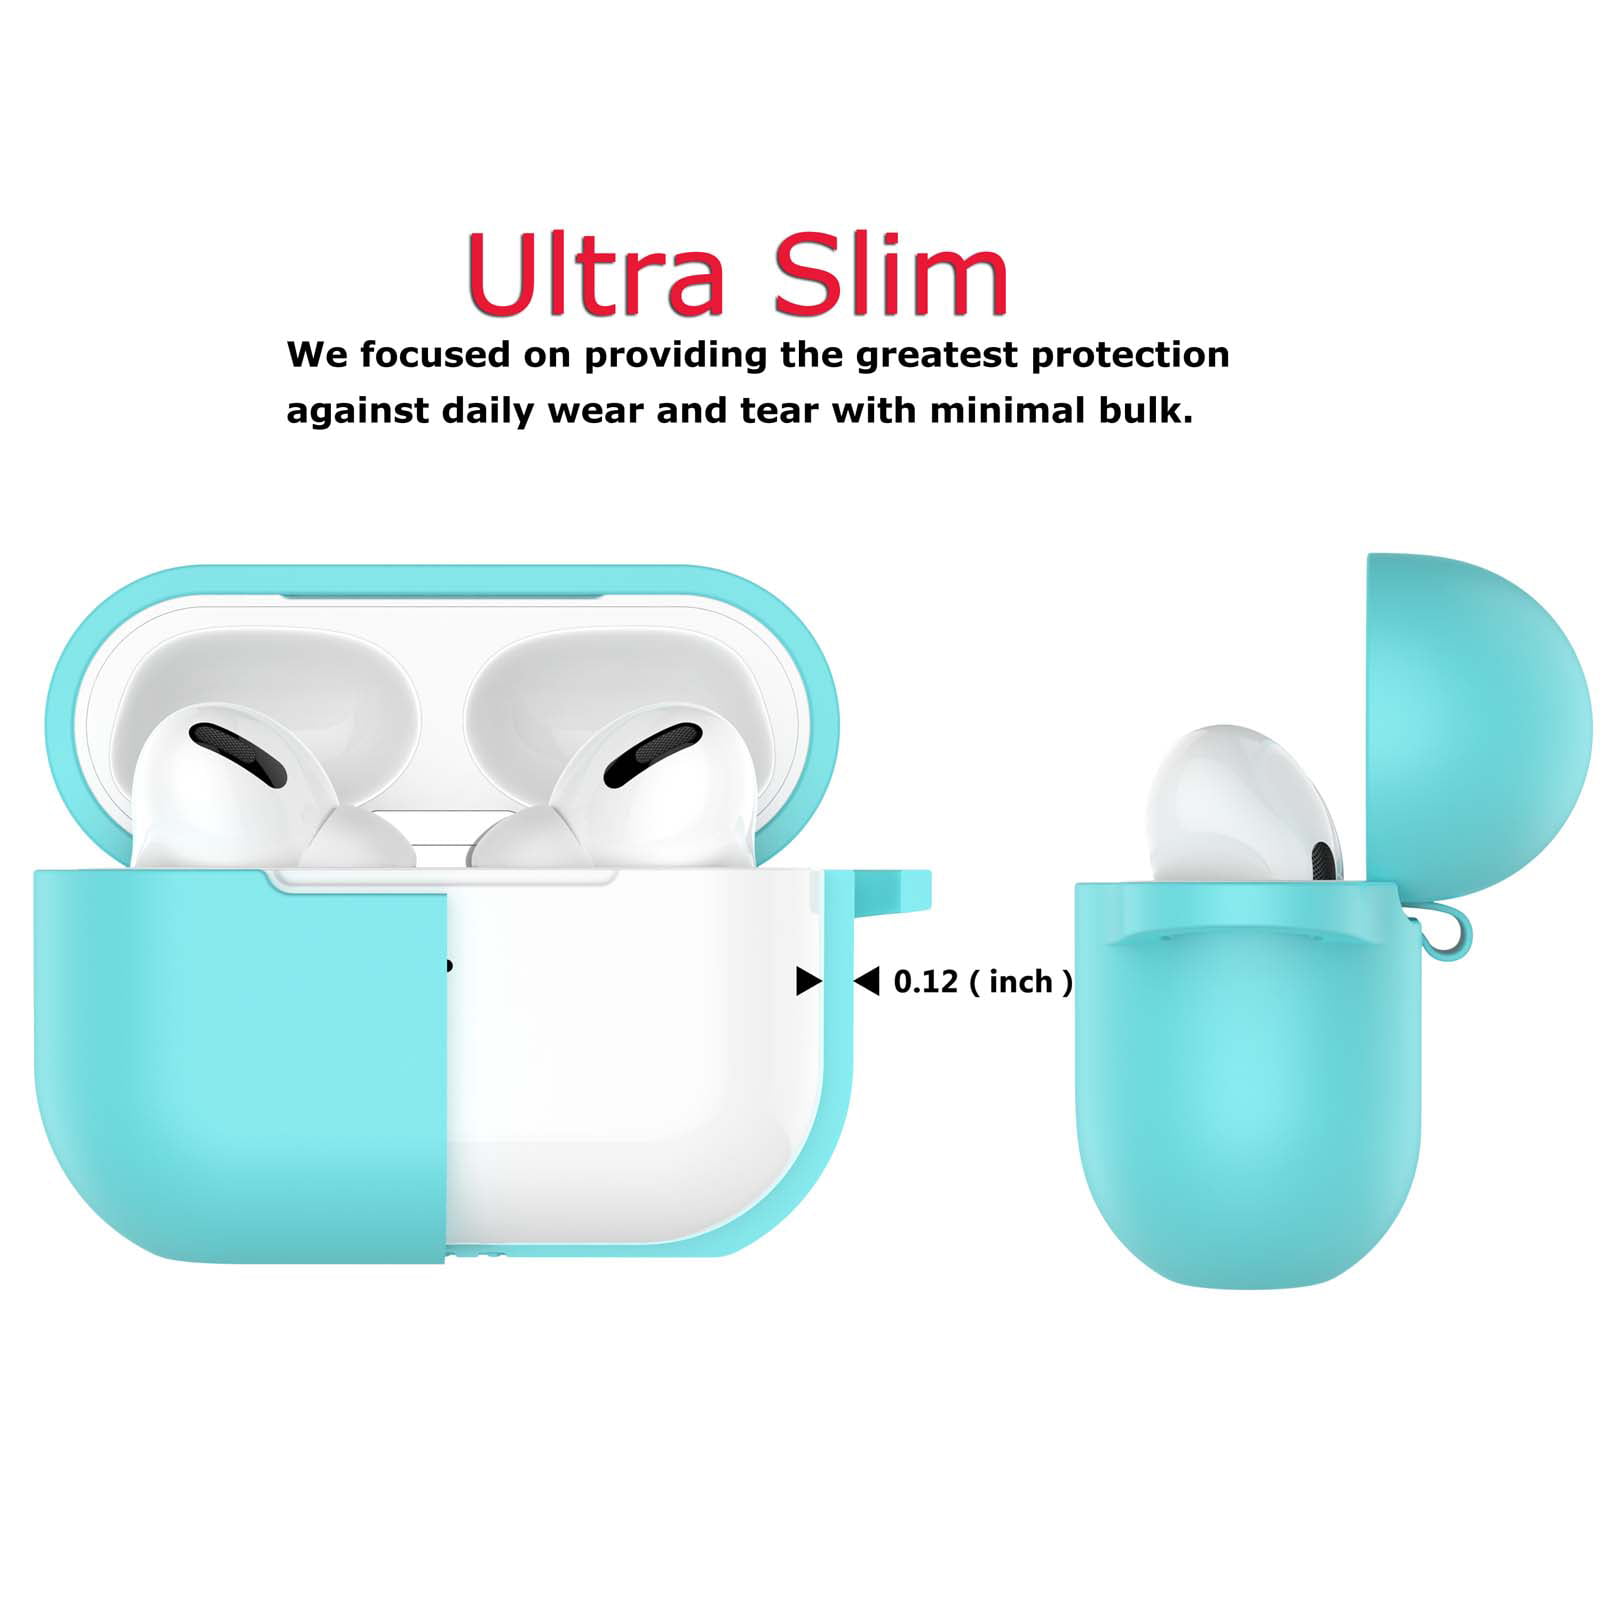  Njjex AirPods Case, AirPods PU Leather Hard Case, Portable  Protective Shockproof Earphone Accessories Cover w/Carabiner/Keychain  Compatible for Apple AirPods 1/ Airpods 2 Charging Case [Basketball] :  Electronics